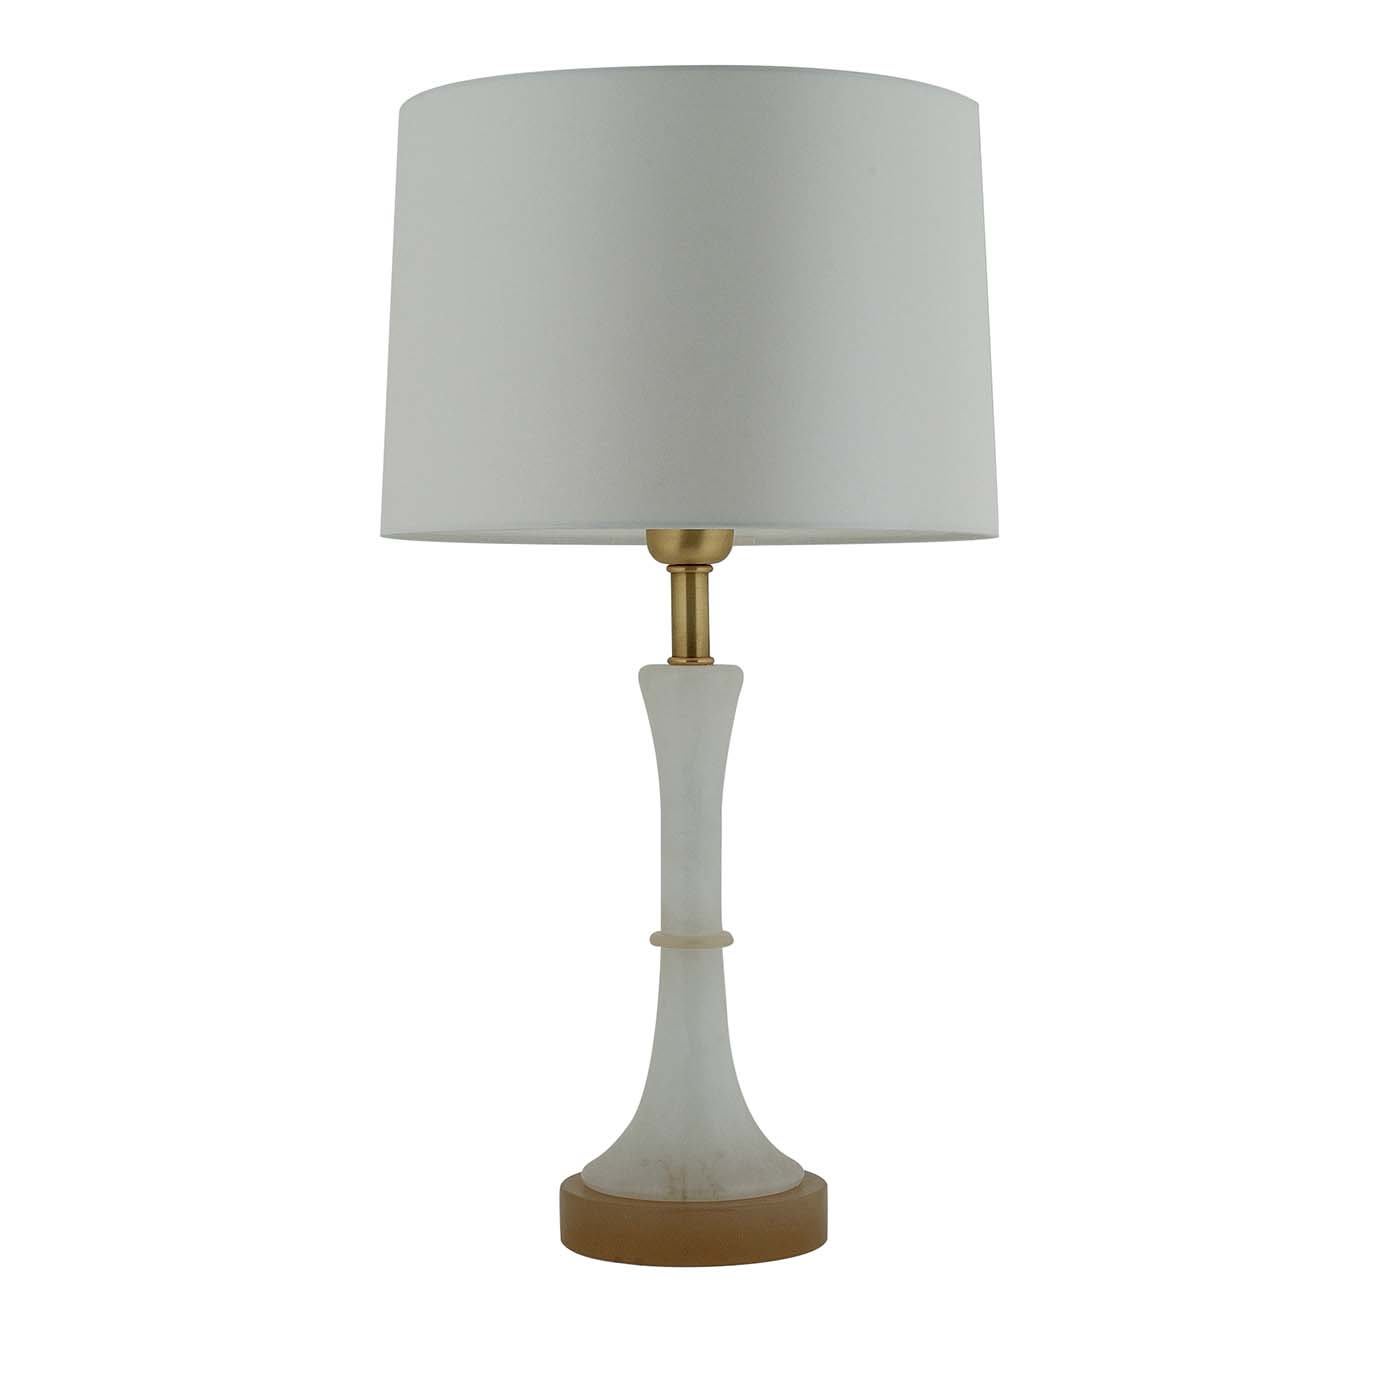 Leslie Table Lamp - CosmoTre